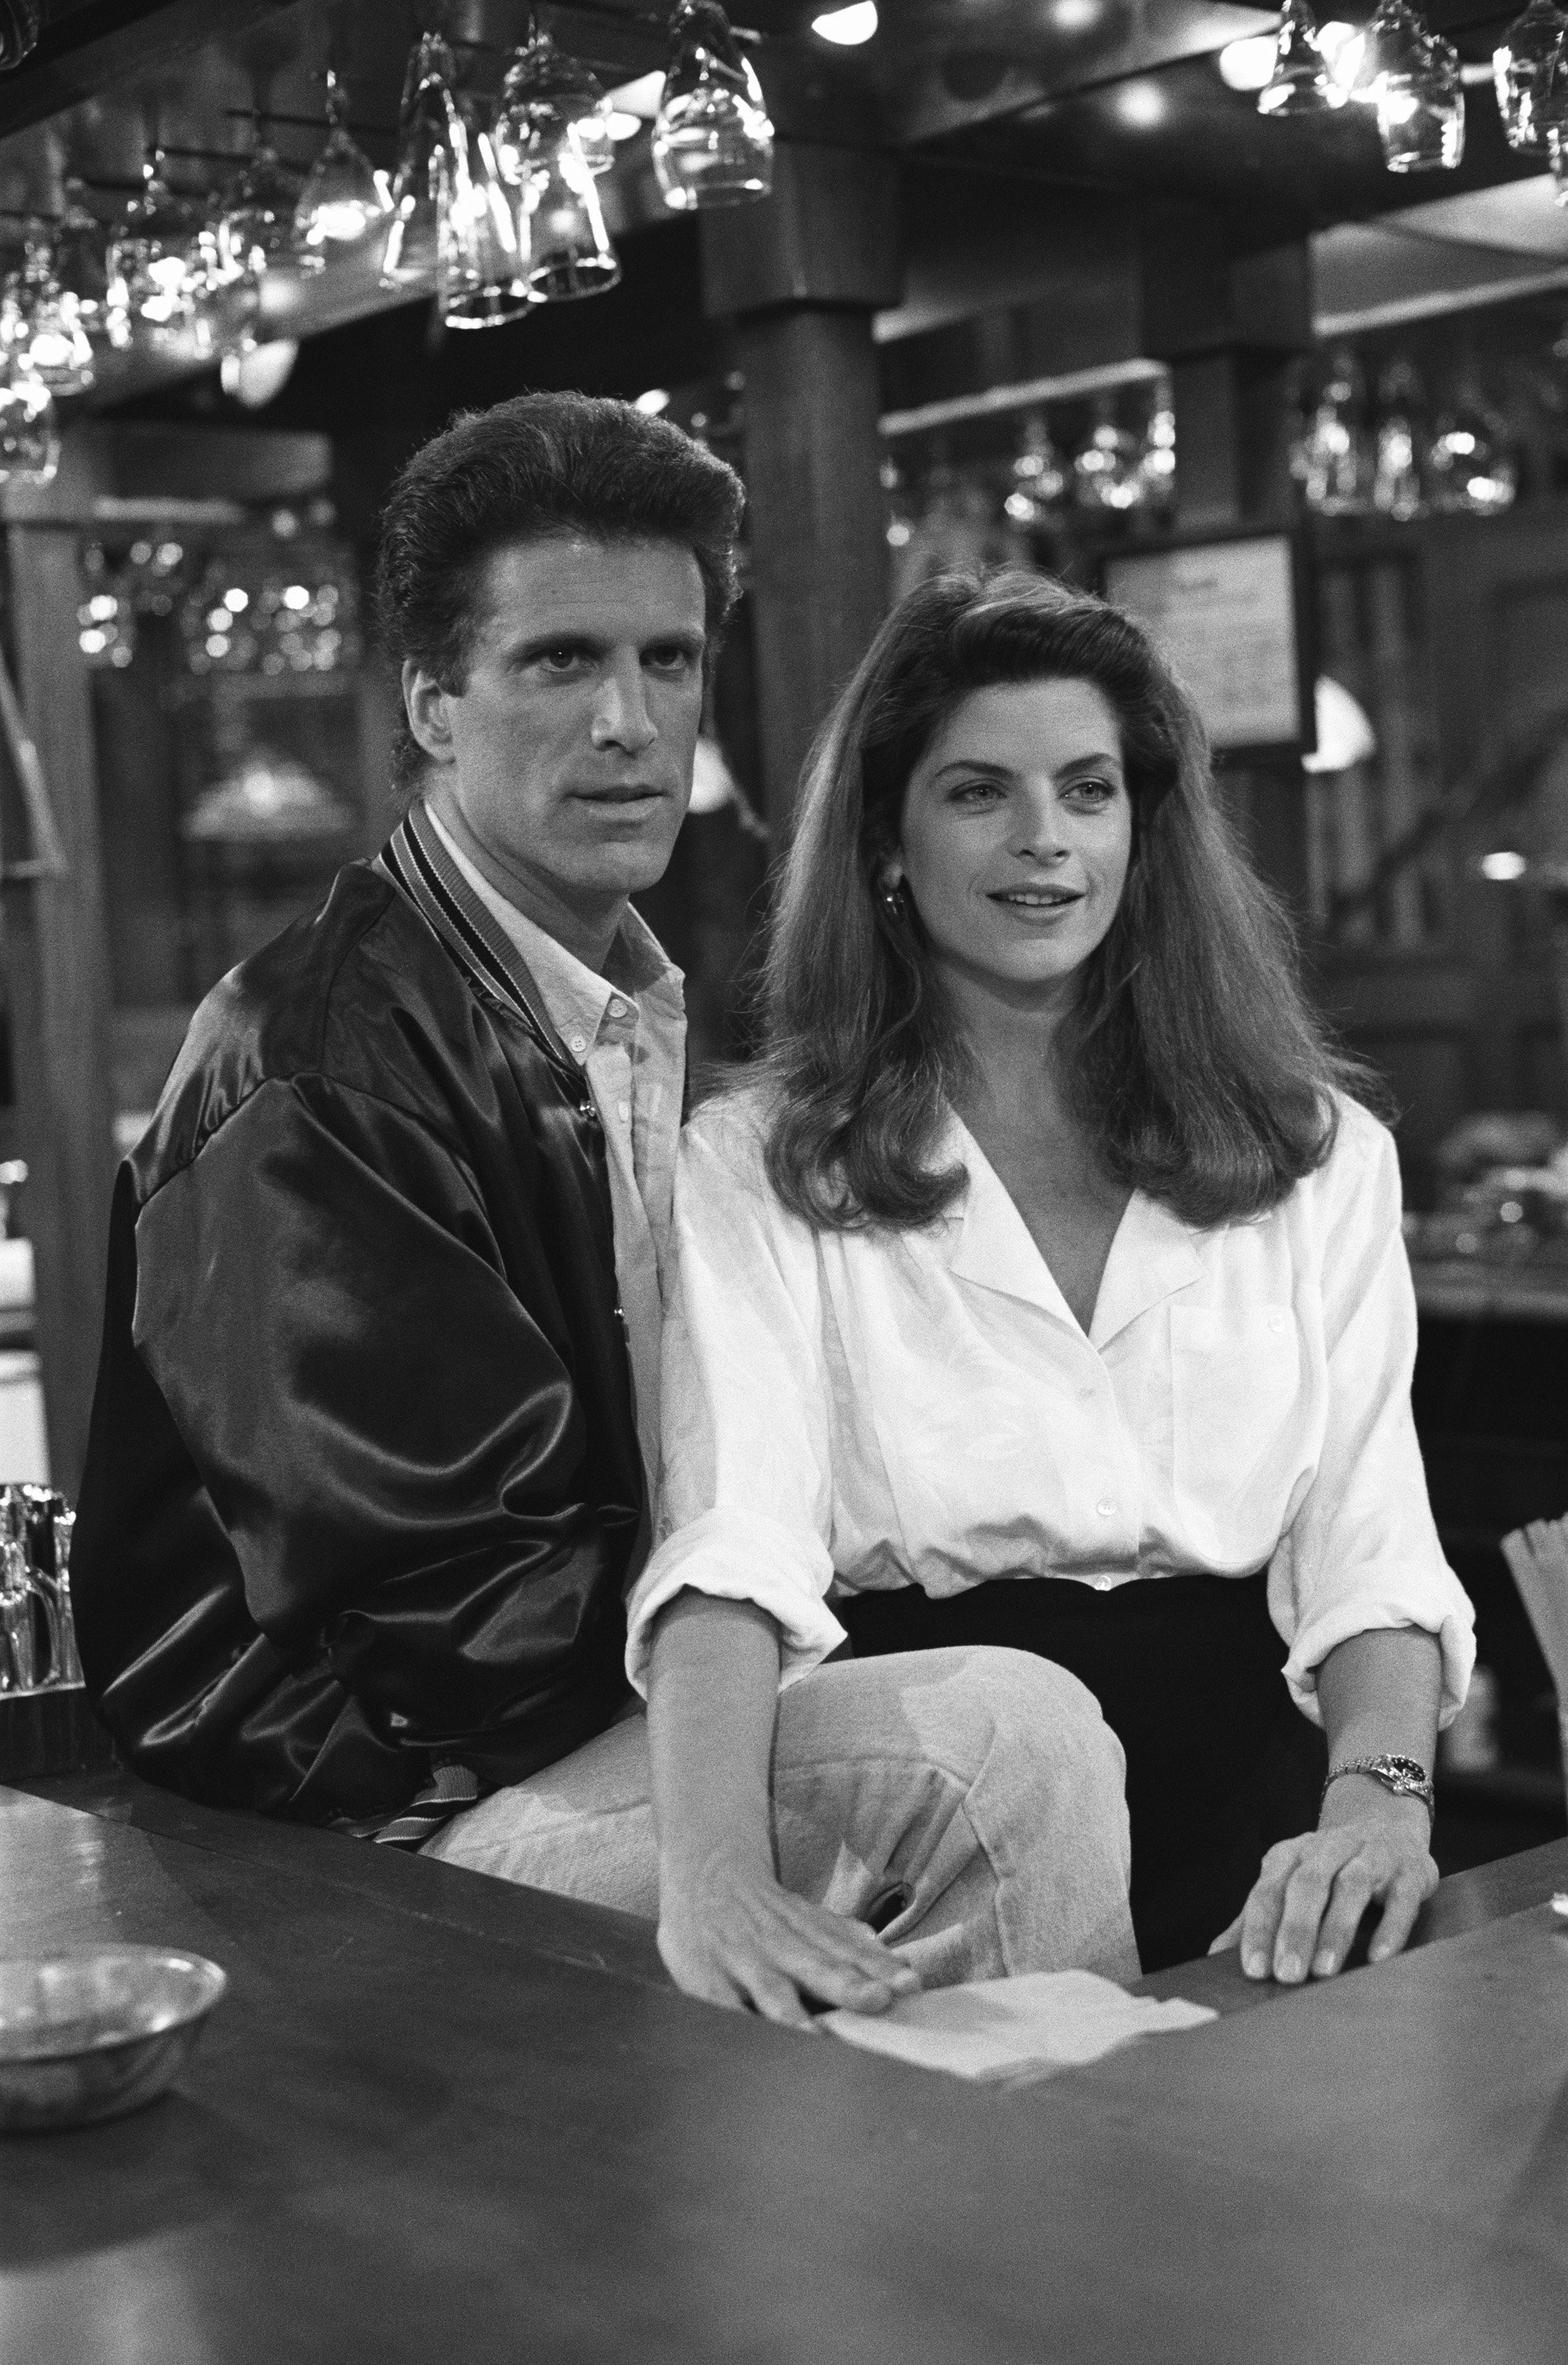 Ted Danson as Sam Malone, Kirstie Alley as Rebecca Howe in "Cheers," 1987. | Source: Getty Images